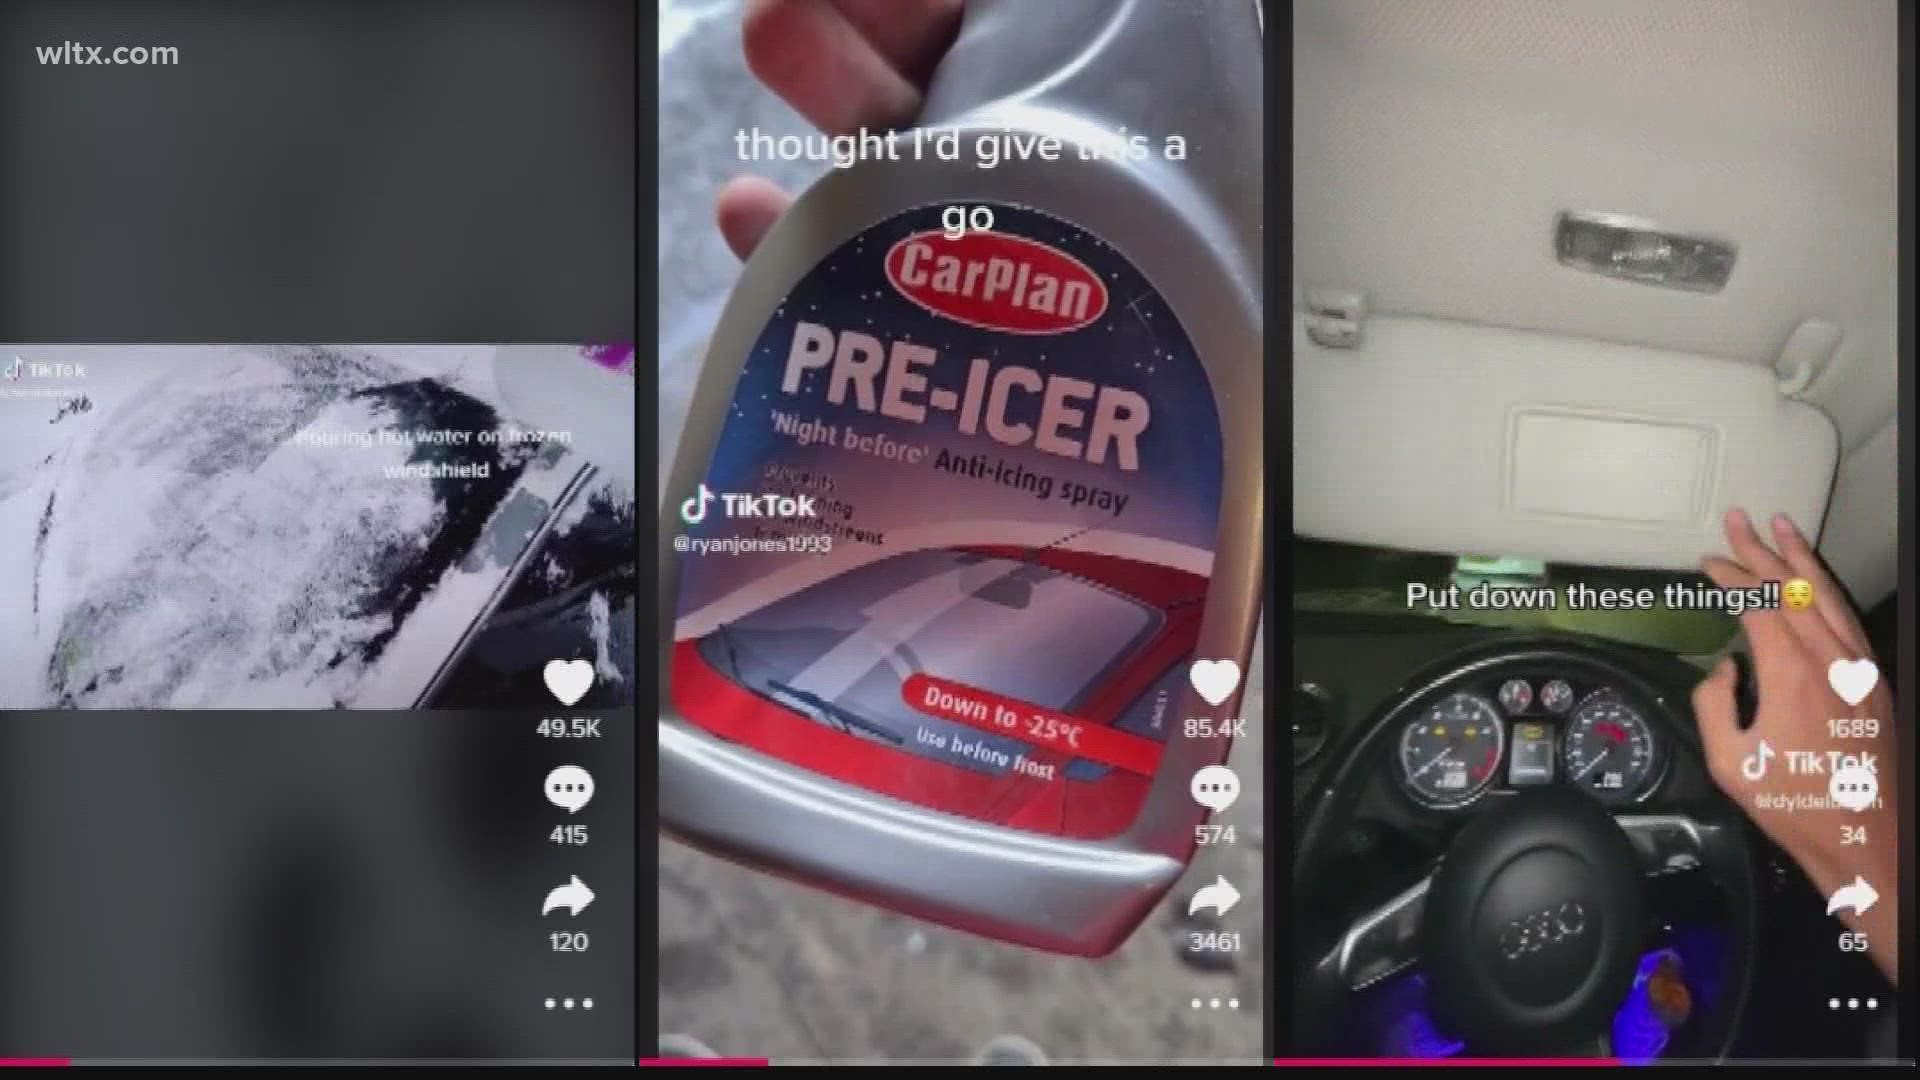 If you're looking for a quick fix to remove ice from your windshield, there are a couple hacks going viral on TikTok that you want to avoid.